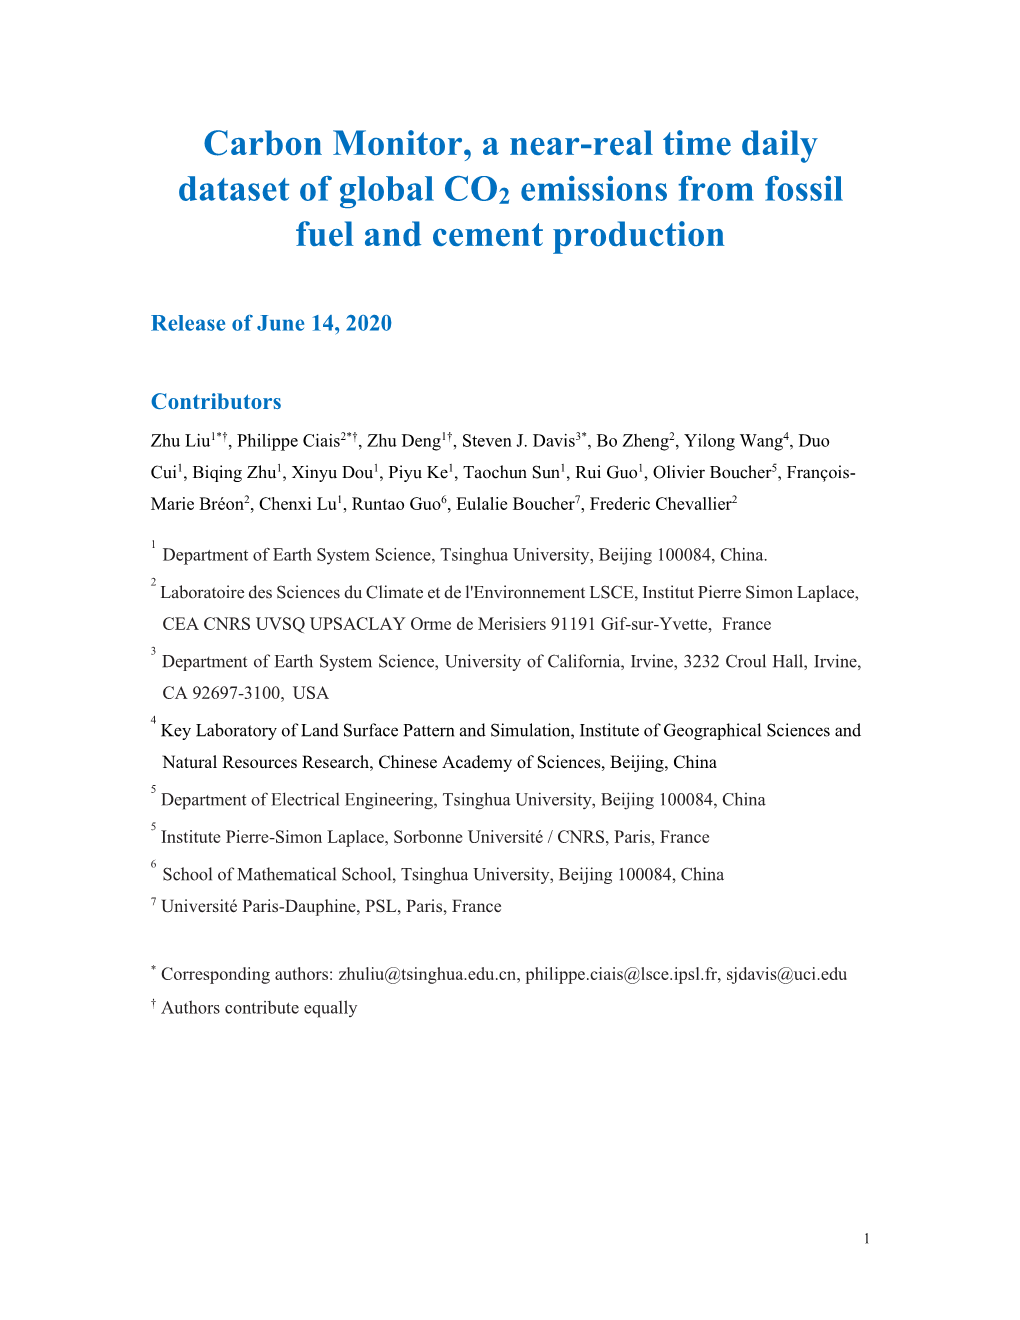 Carbon Monitor, a Near-Real Time Daily Dataset of Global CO2 Emissions from Fossil Fuel and Cement Production